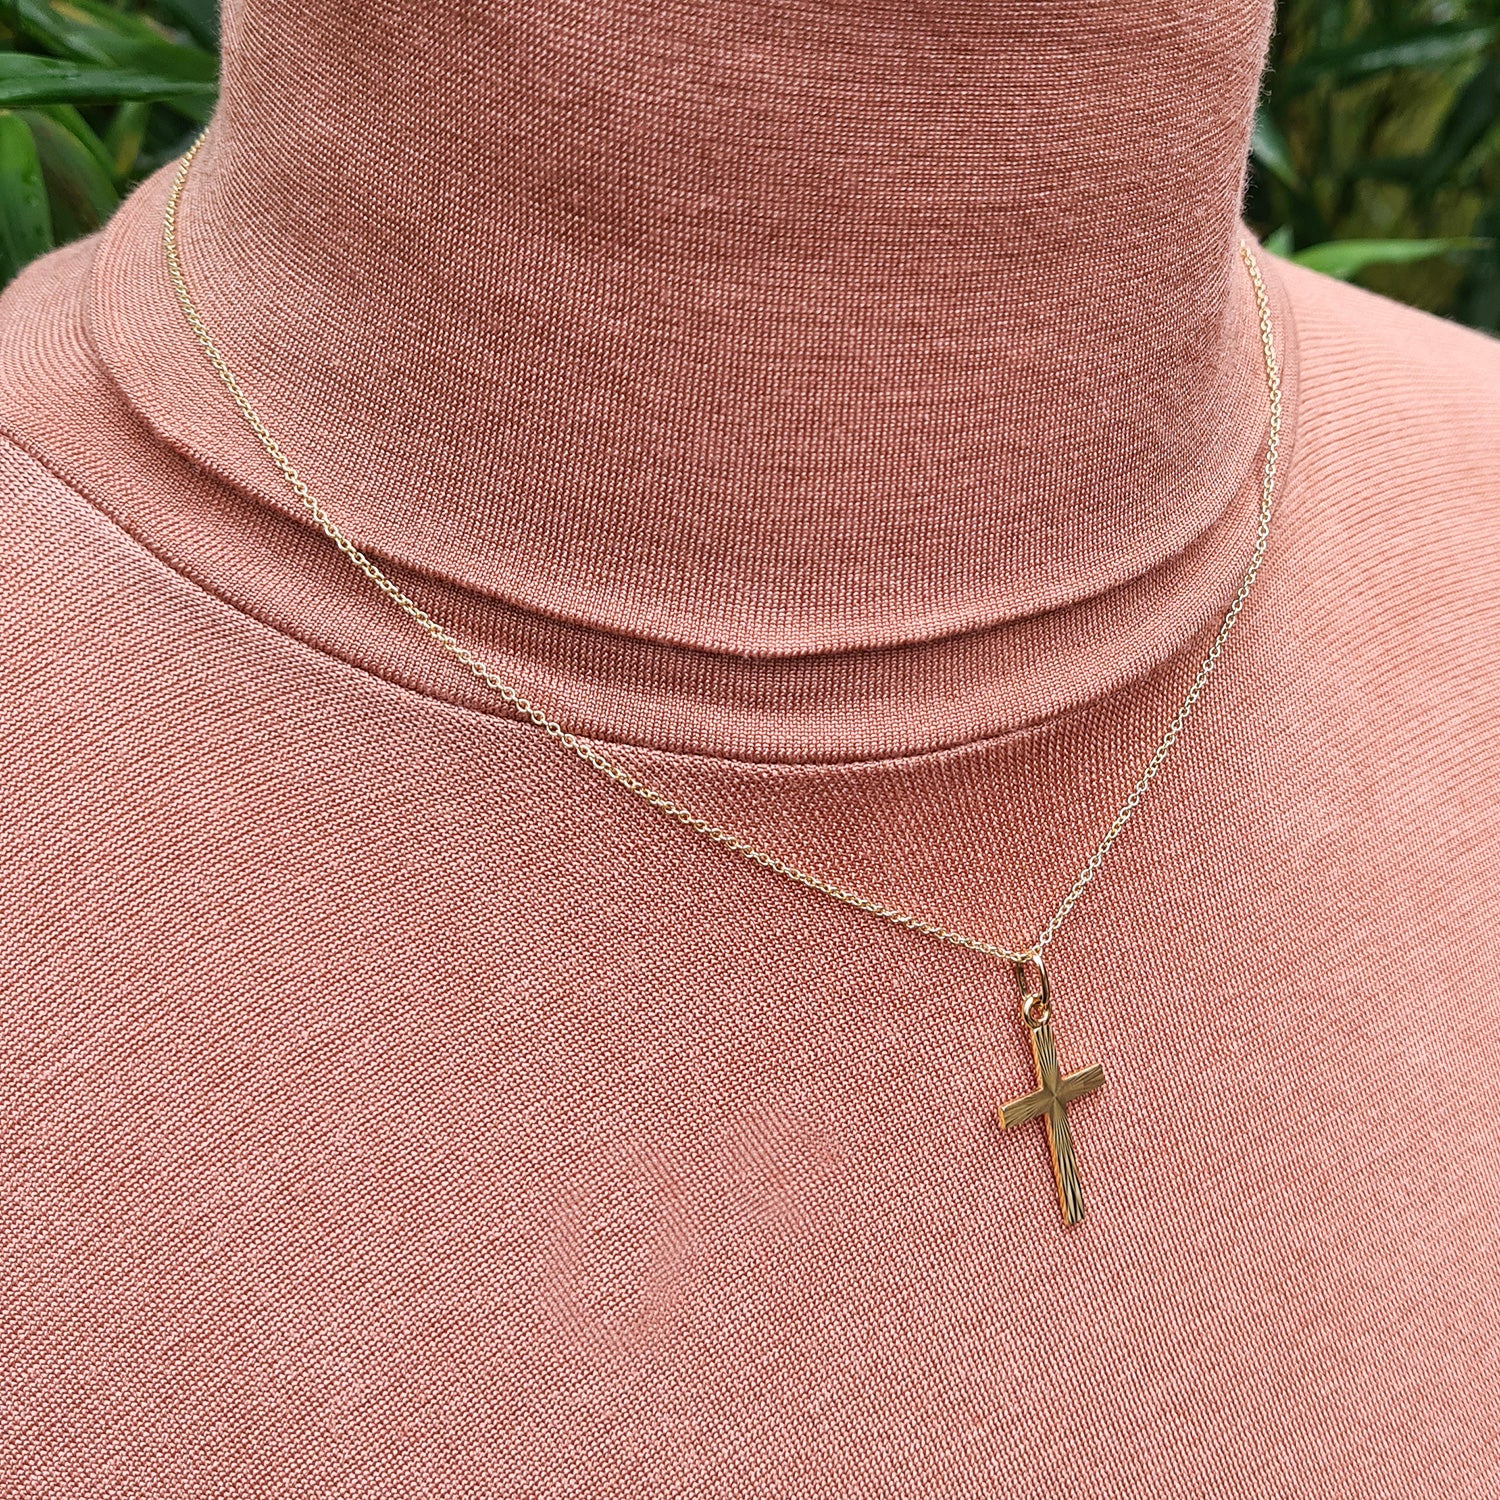 another view of gold cross necklace